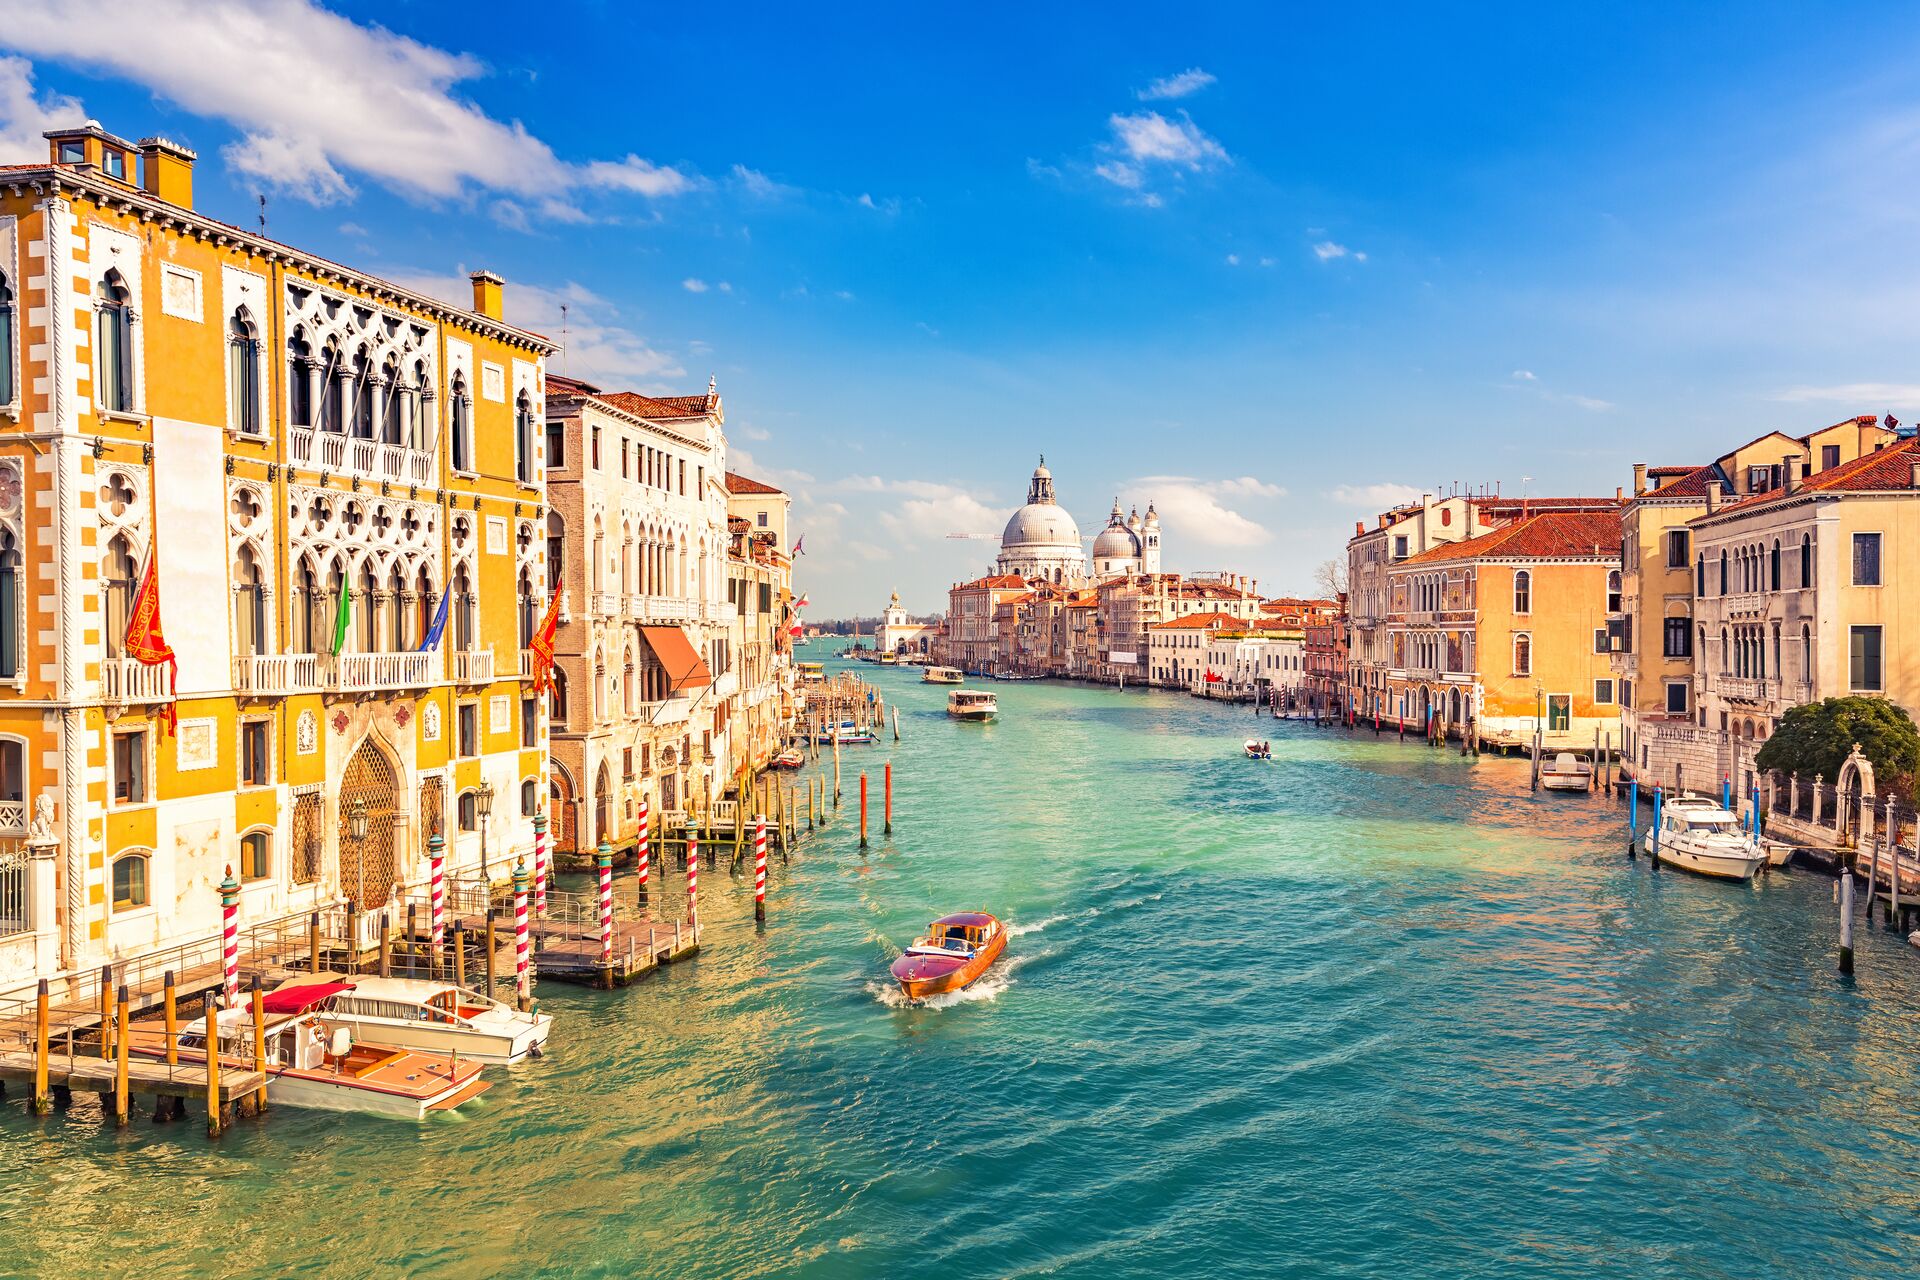 10 fascinating things you’ll learn on this 10 day Italy tour